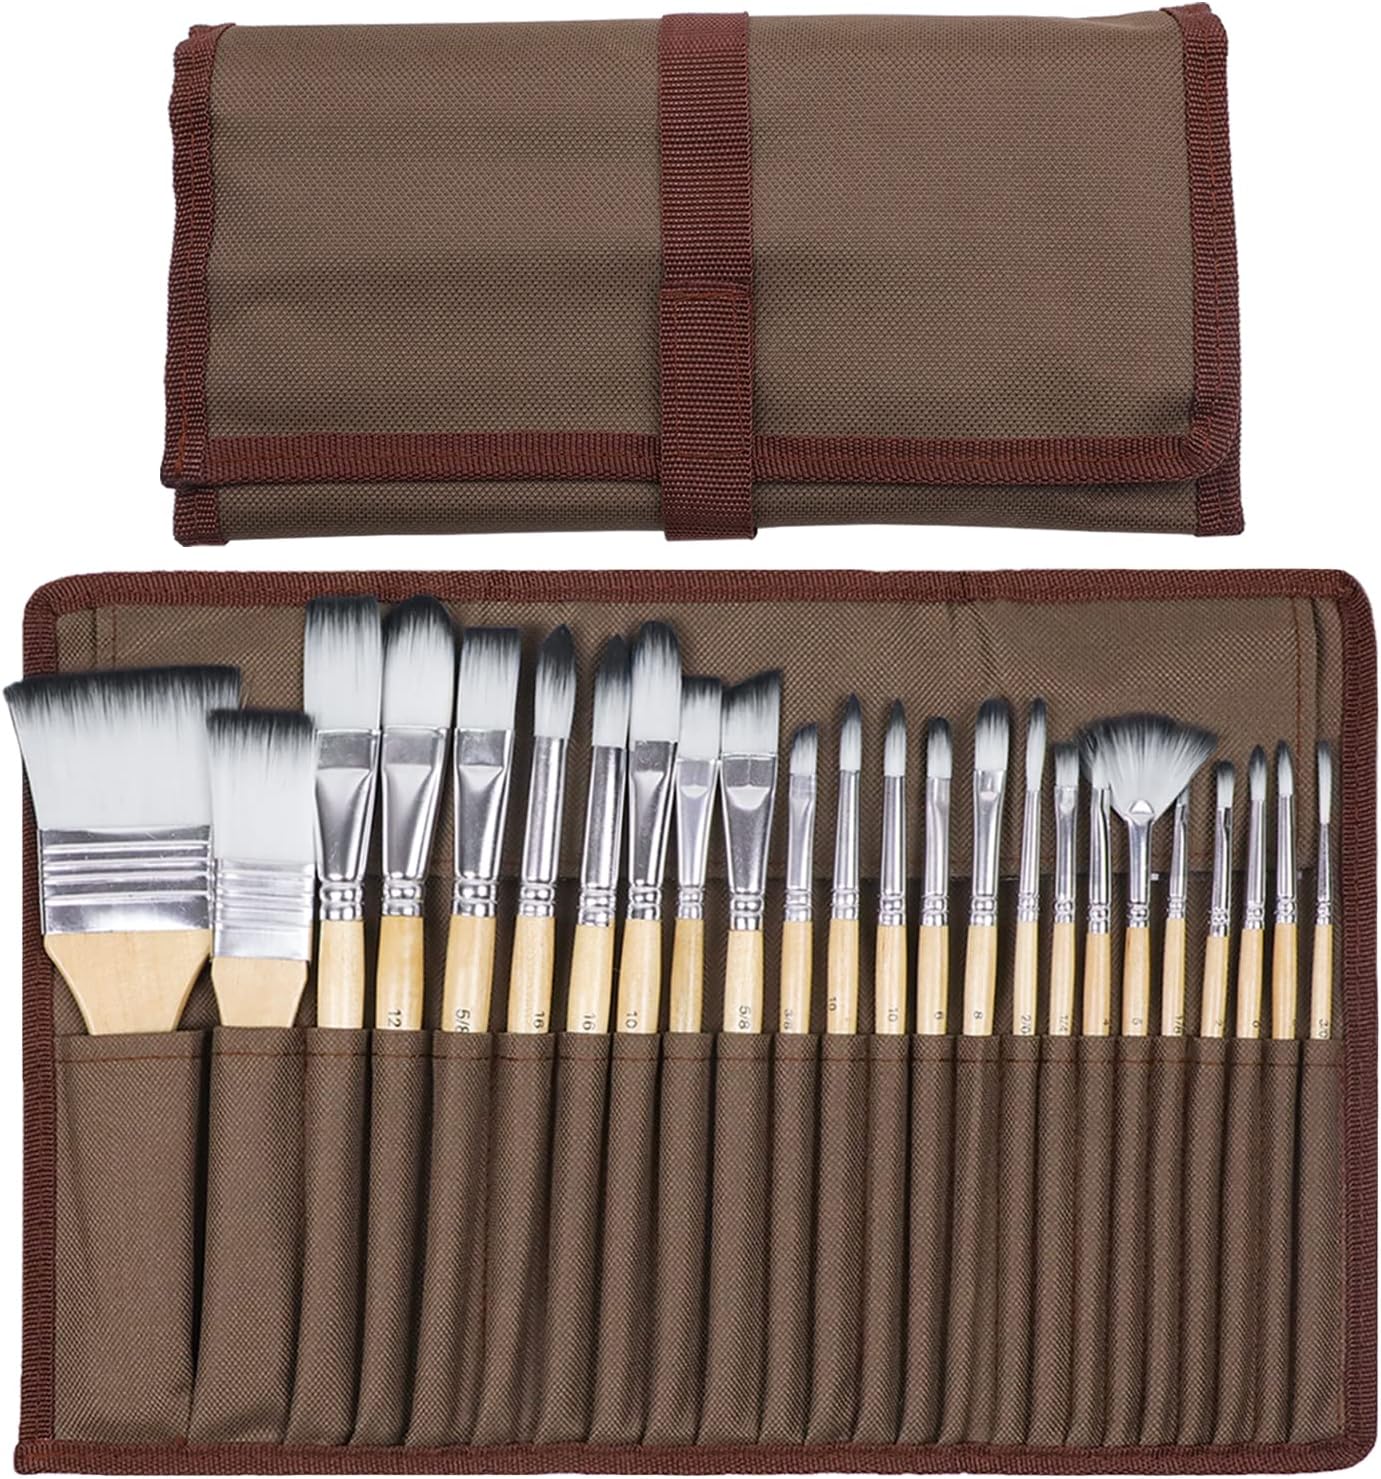 Artecho Art Paint Brushes Set 24 Different Shapes for Watercolor, Acrylic, Gouache, Rock Painting, Premium Taklon Brush, with Organizing Case for Artists